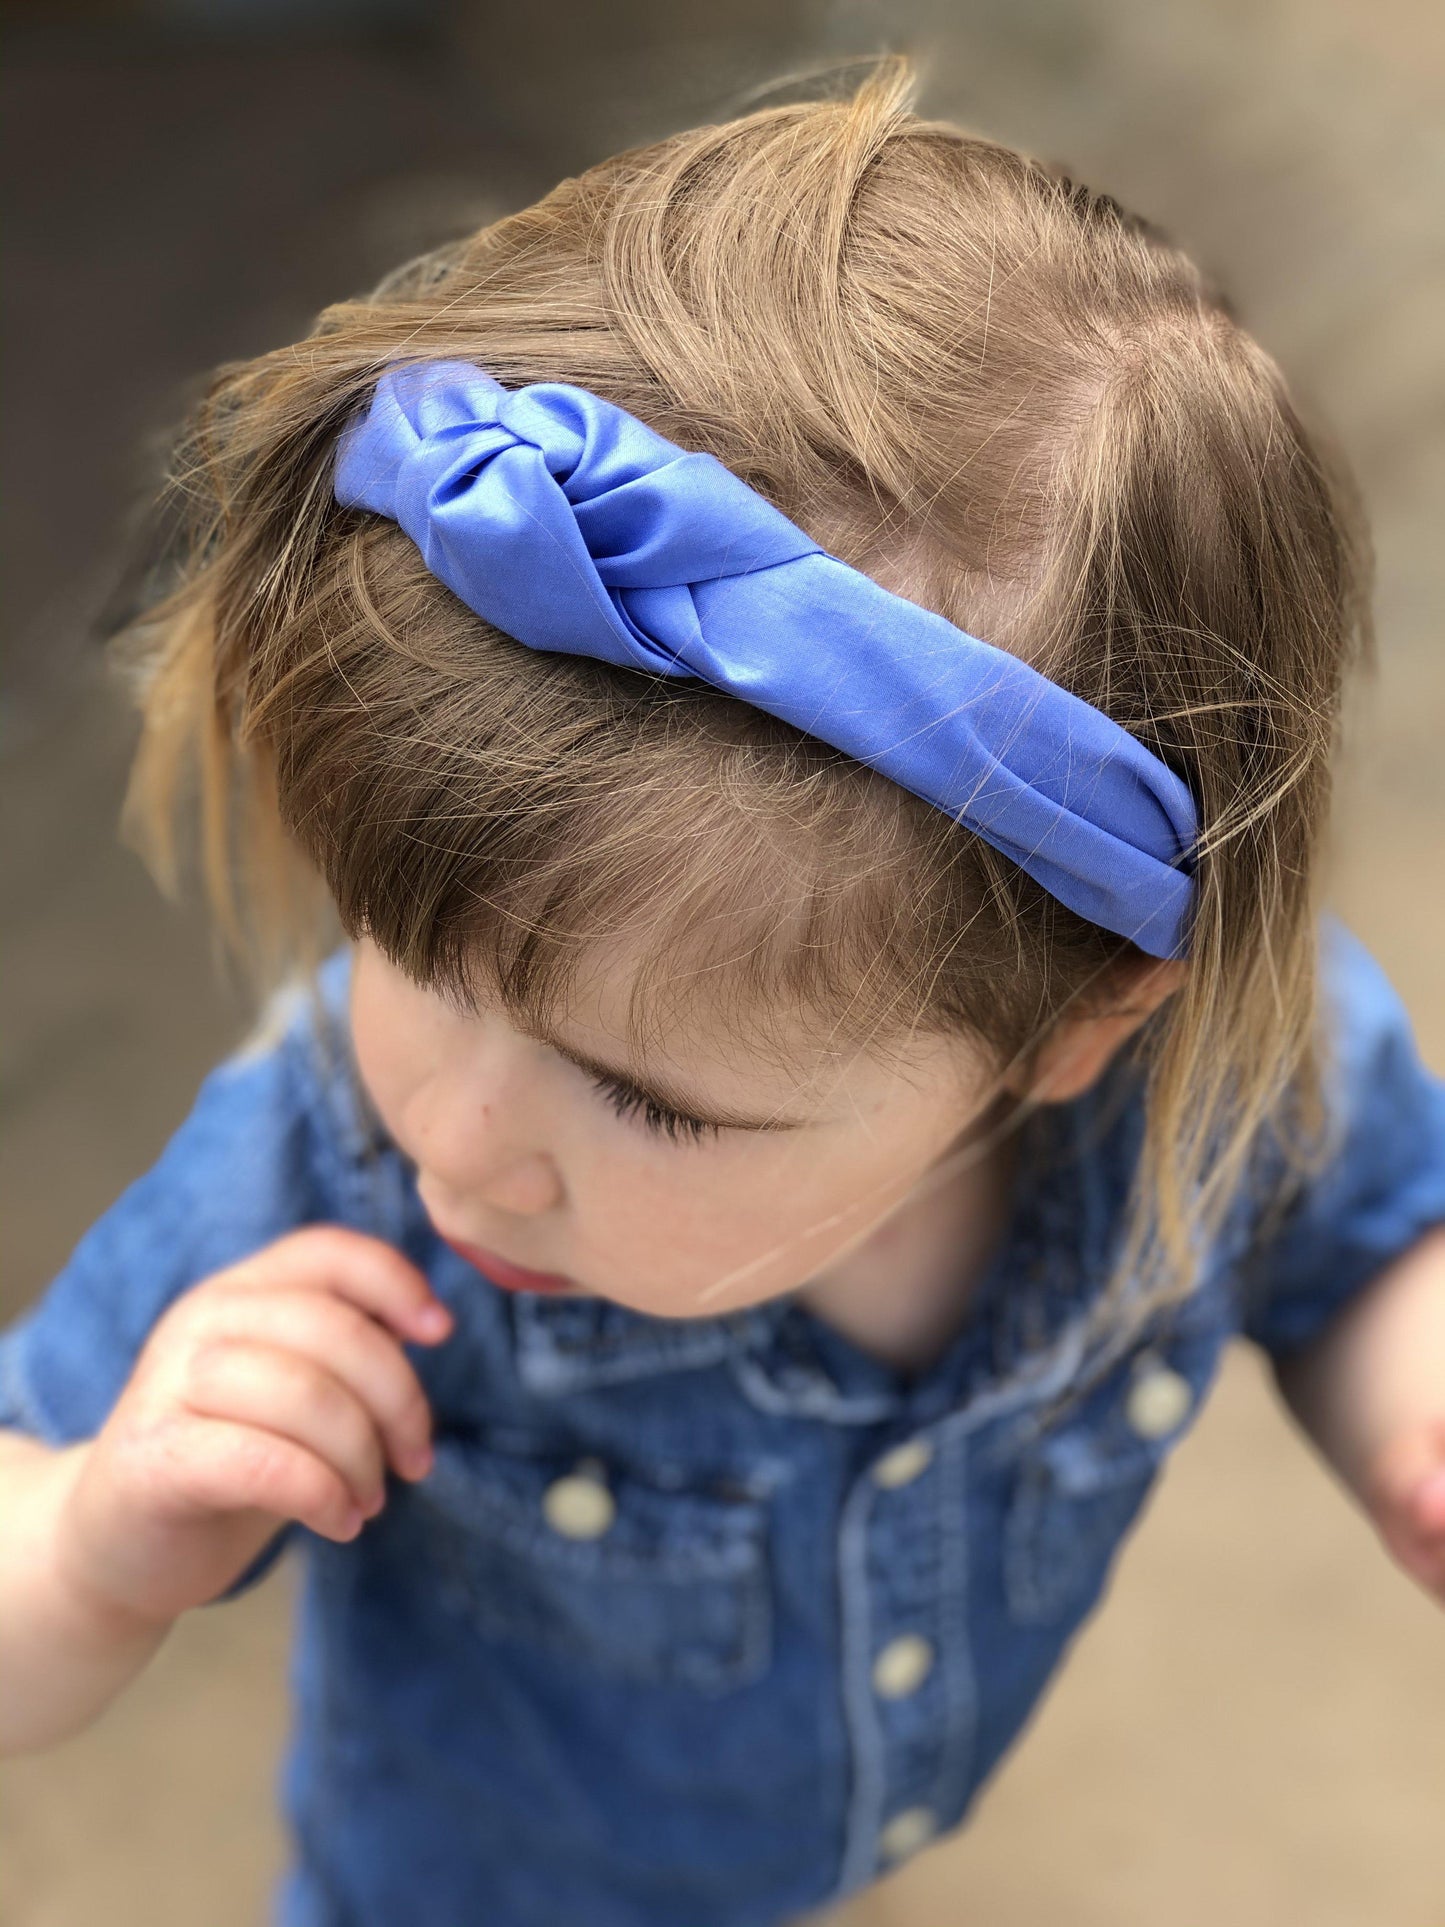 Kids Knot Alice band - Liberty of London Periwinkle blue blue